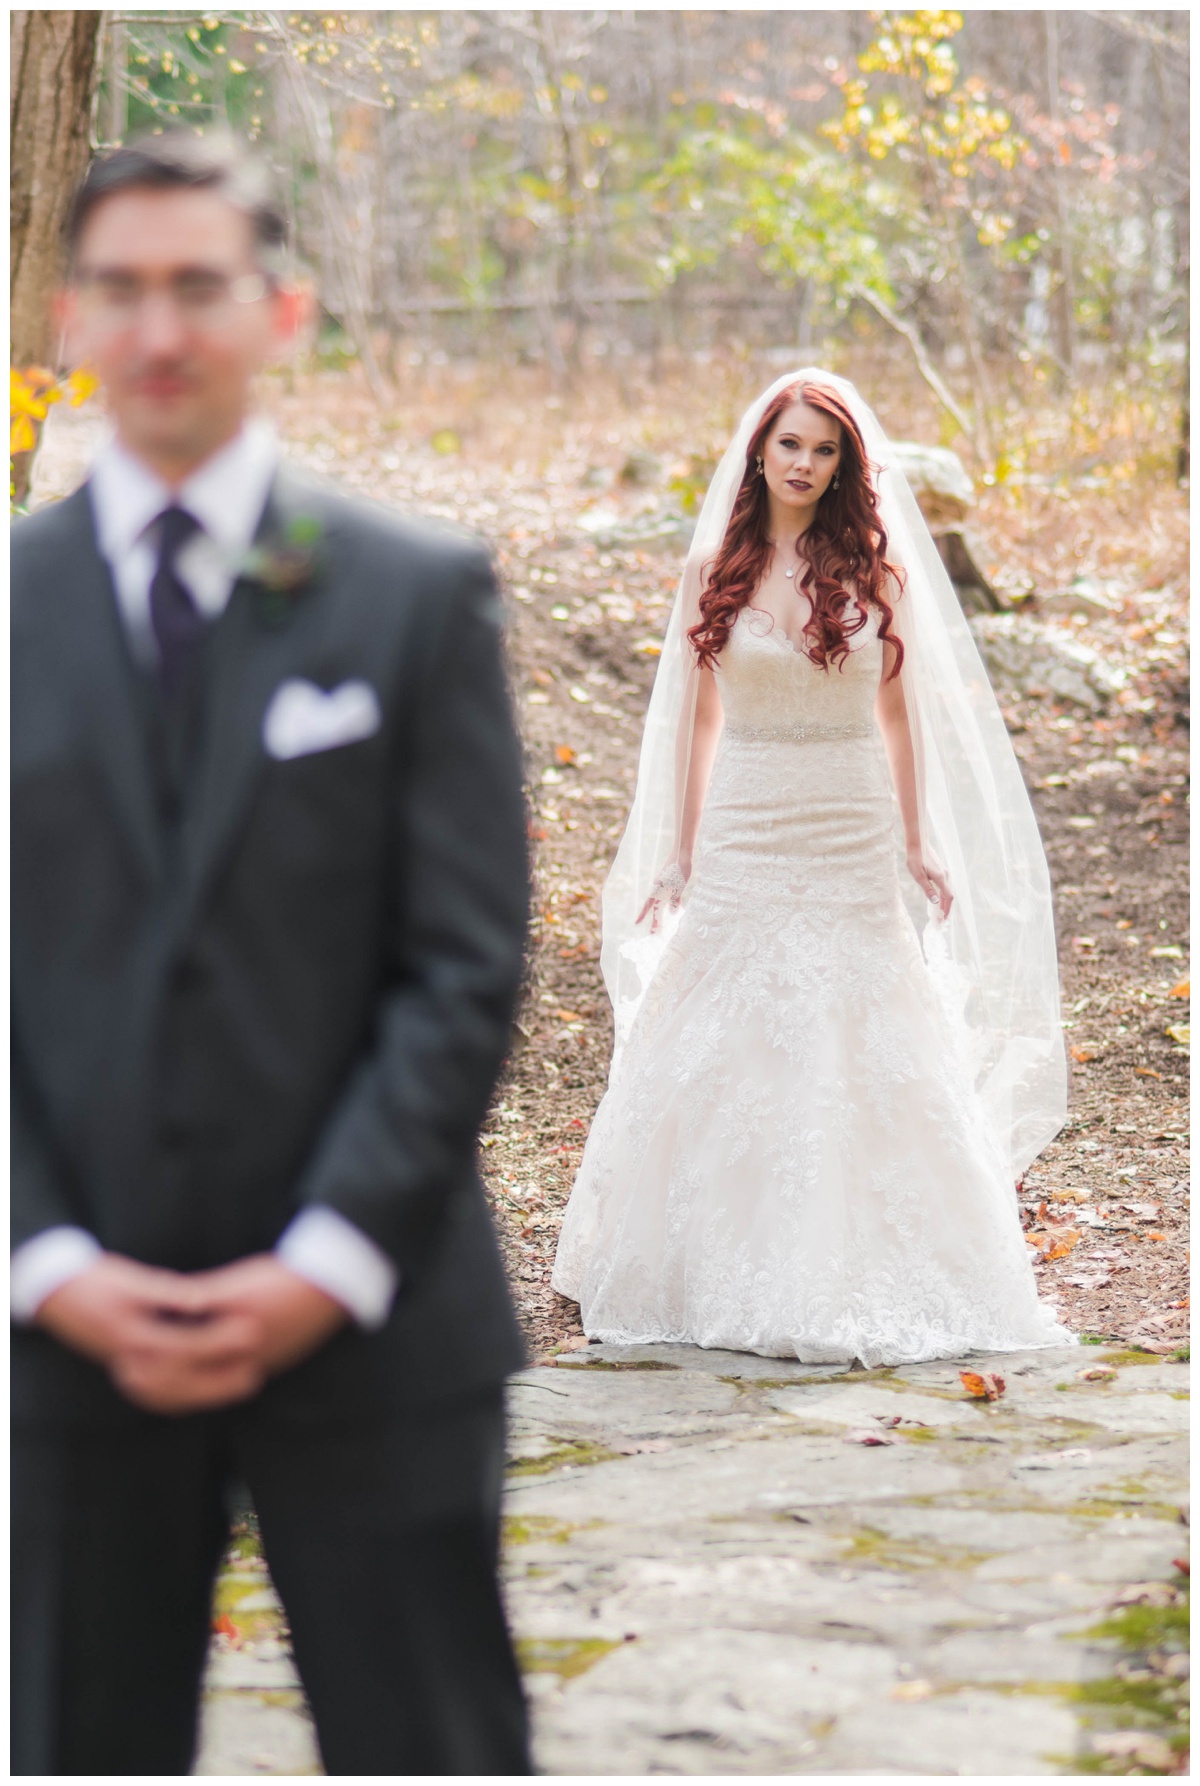 Whimsical Woodland Fall Wedding at mountain memories at thorpewood in thurmont maryland in october by sarah & dave photography richmond wedding photographer groom and bride first look photo inspiration purple tie charcoal gray black suit white wedding dress changing leaves focus on bride